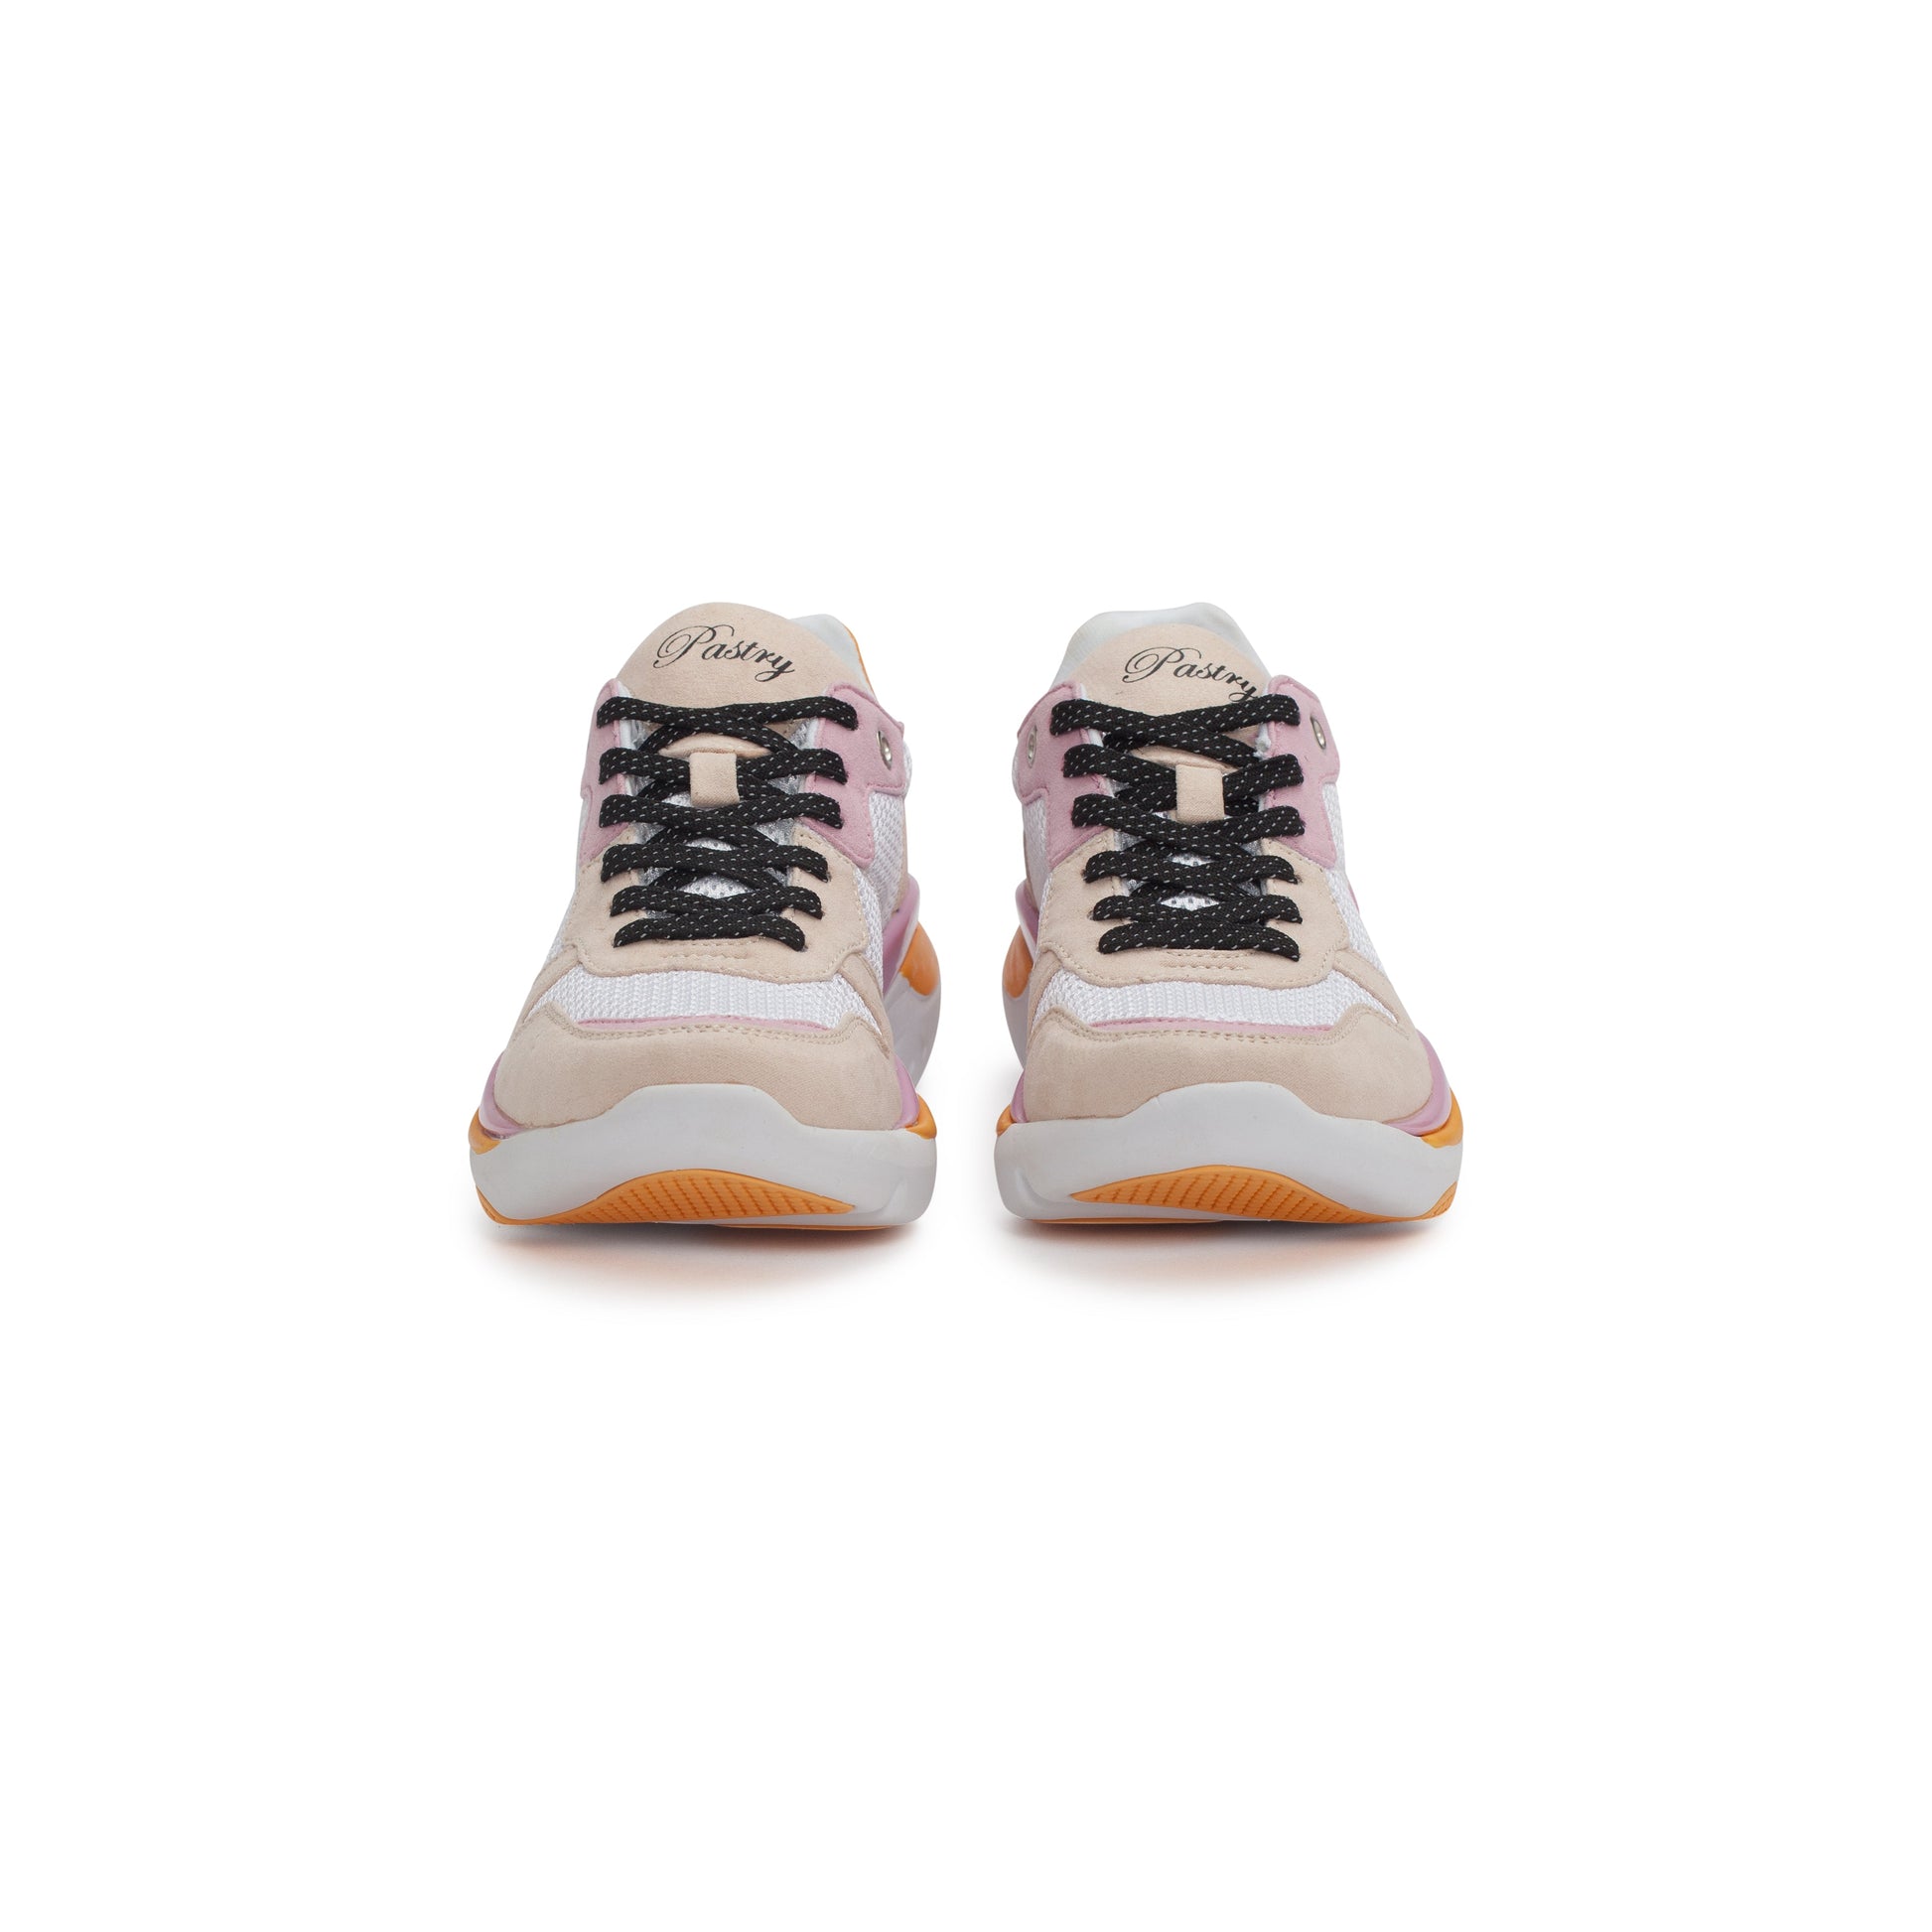 Pair of Pastry Adult Women's Carla Sneaker in White/Salmon/Pink front view